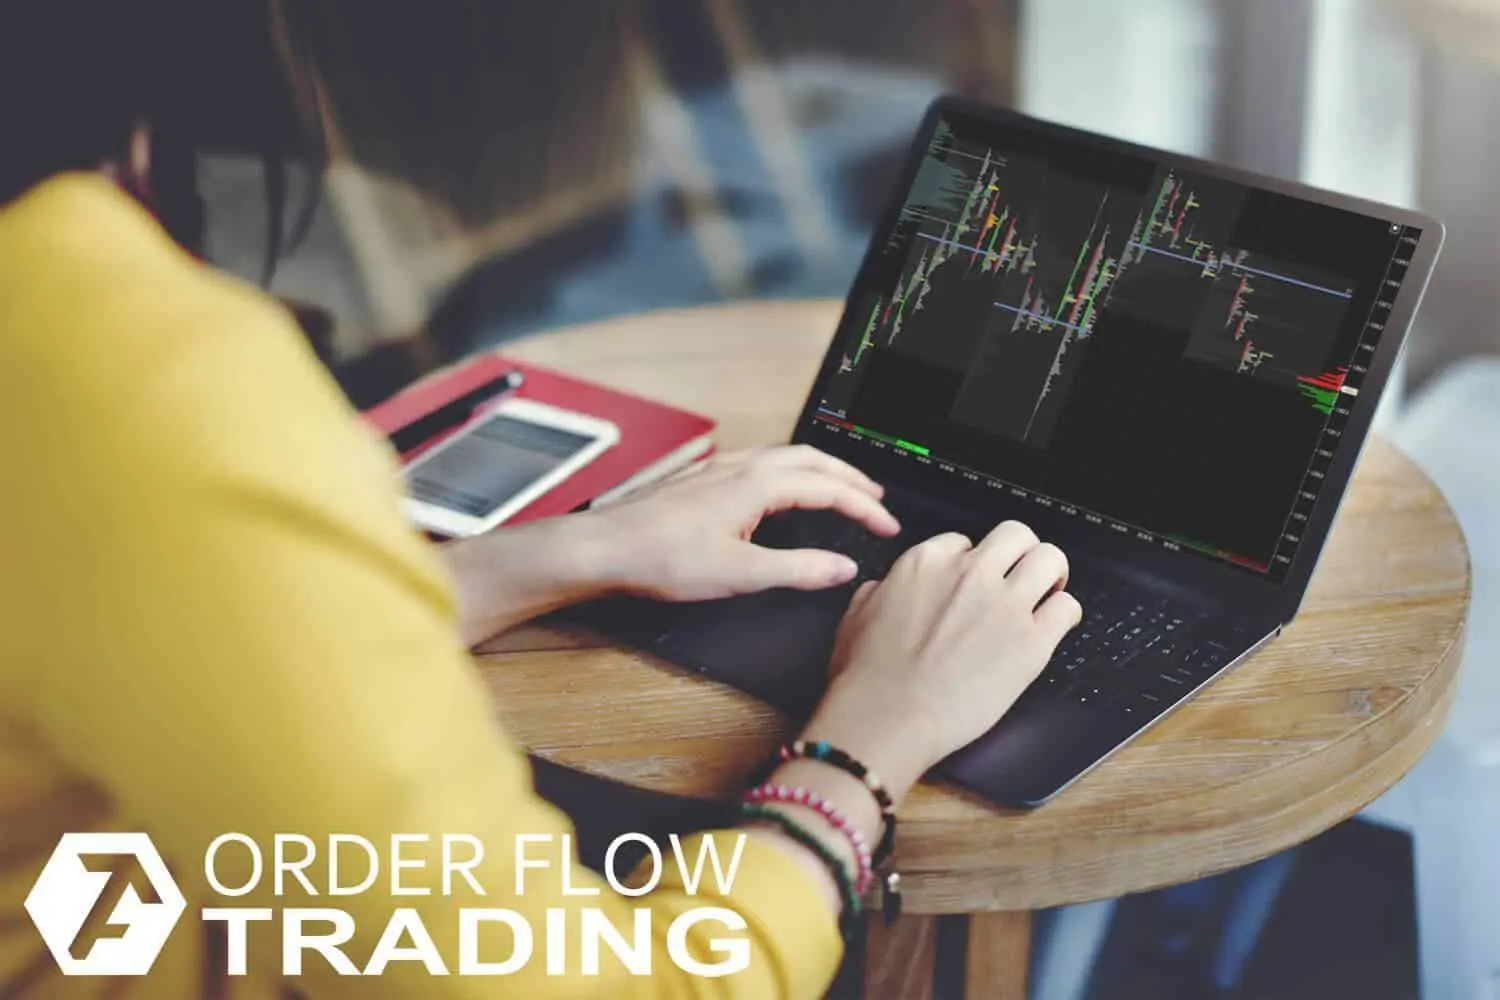 Market profiles: 3 things that can improve your trading